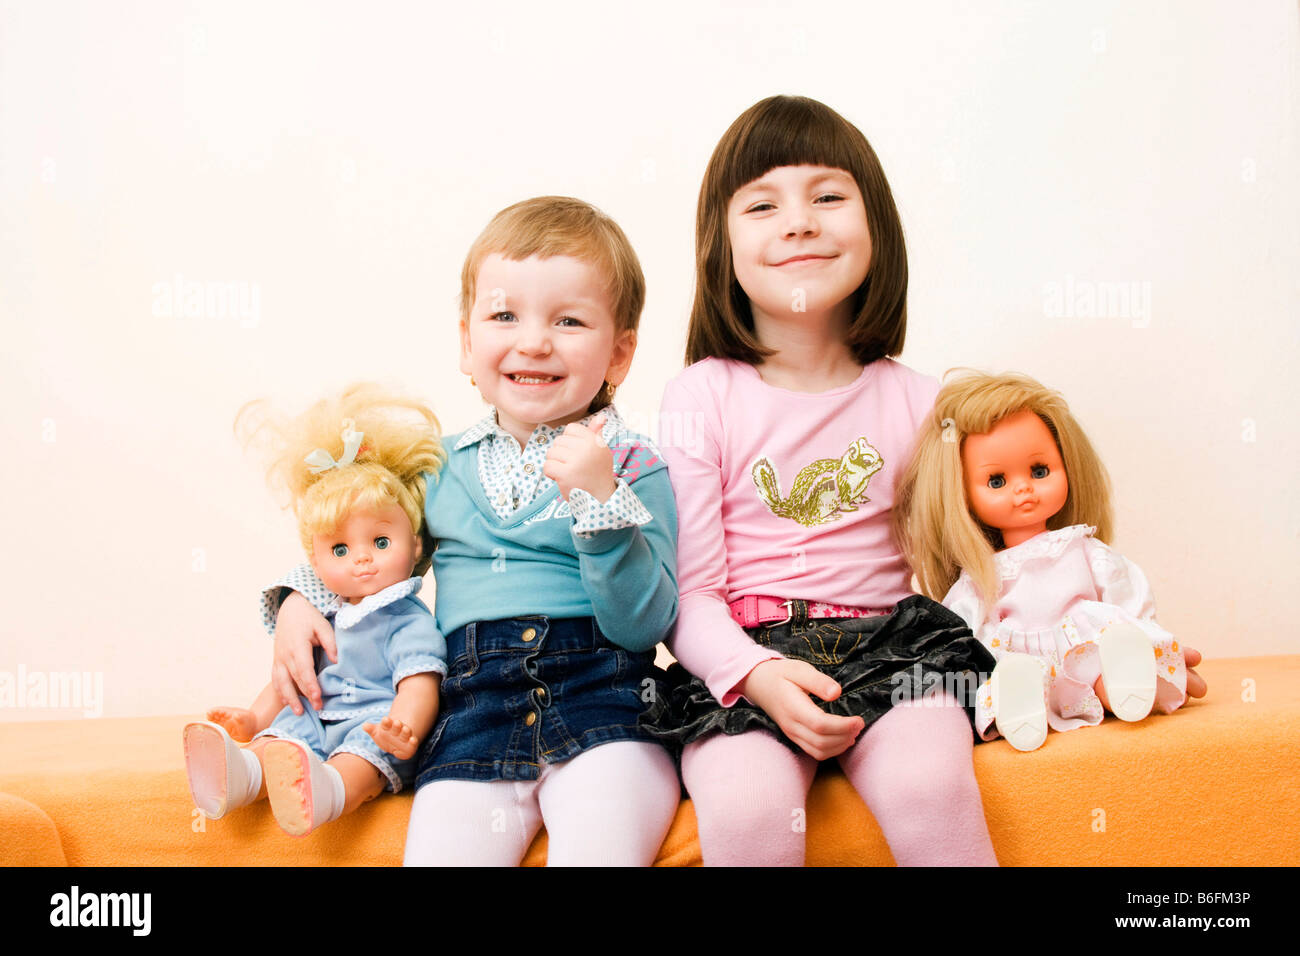 Little girls, 3 and 6 years, with dollies, indoors Stock Photo